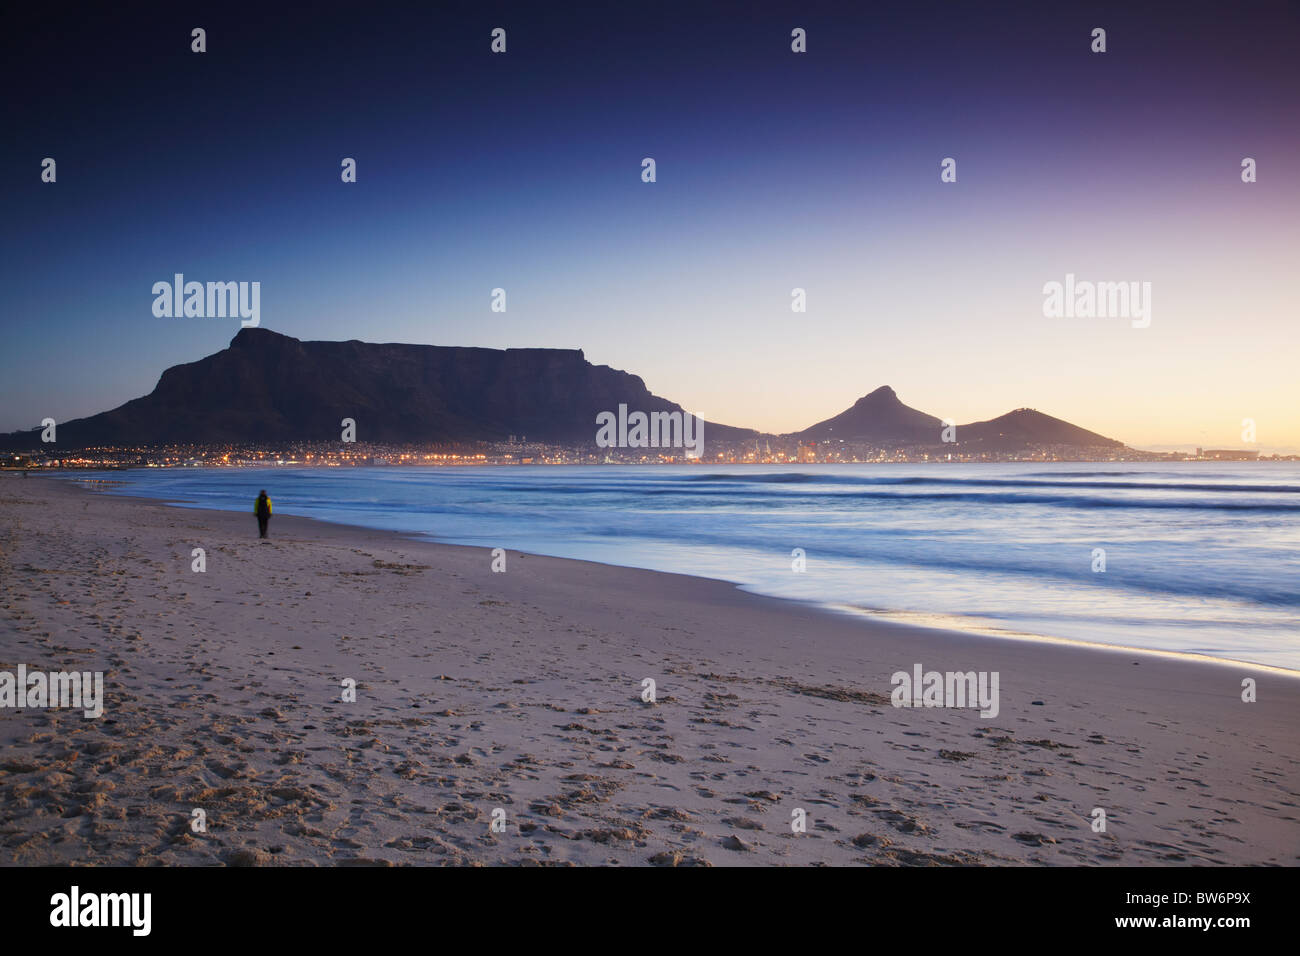 View of Table Mountain at sunset from Milnerton beach, Cape Town, Western Cape, South Africa Stock Photo